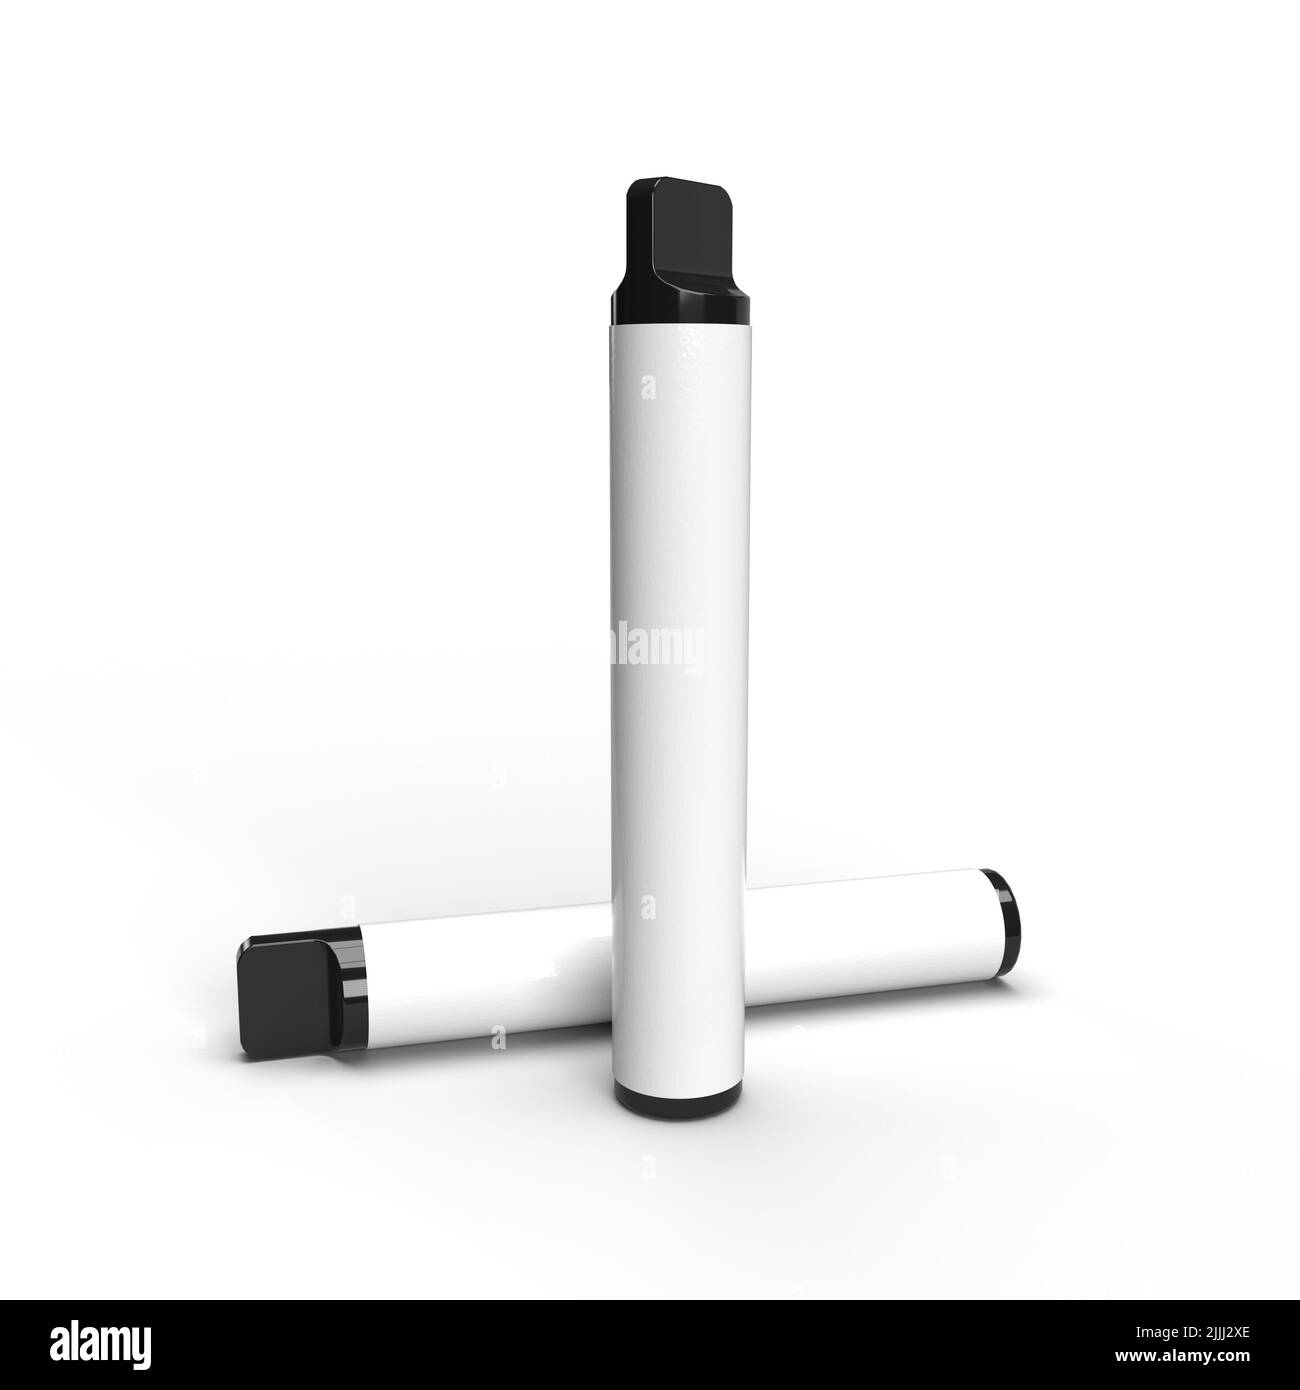 Disposable Vape Pen with text space, isolated on a white background with a black tip. 3d render illustration. Stock Photo